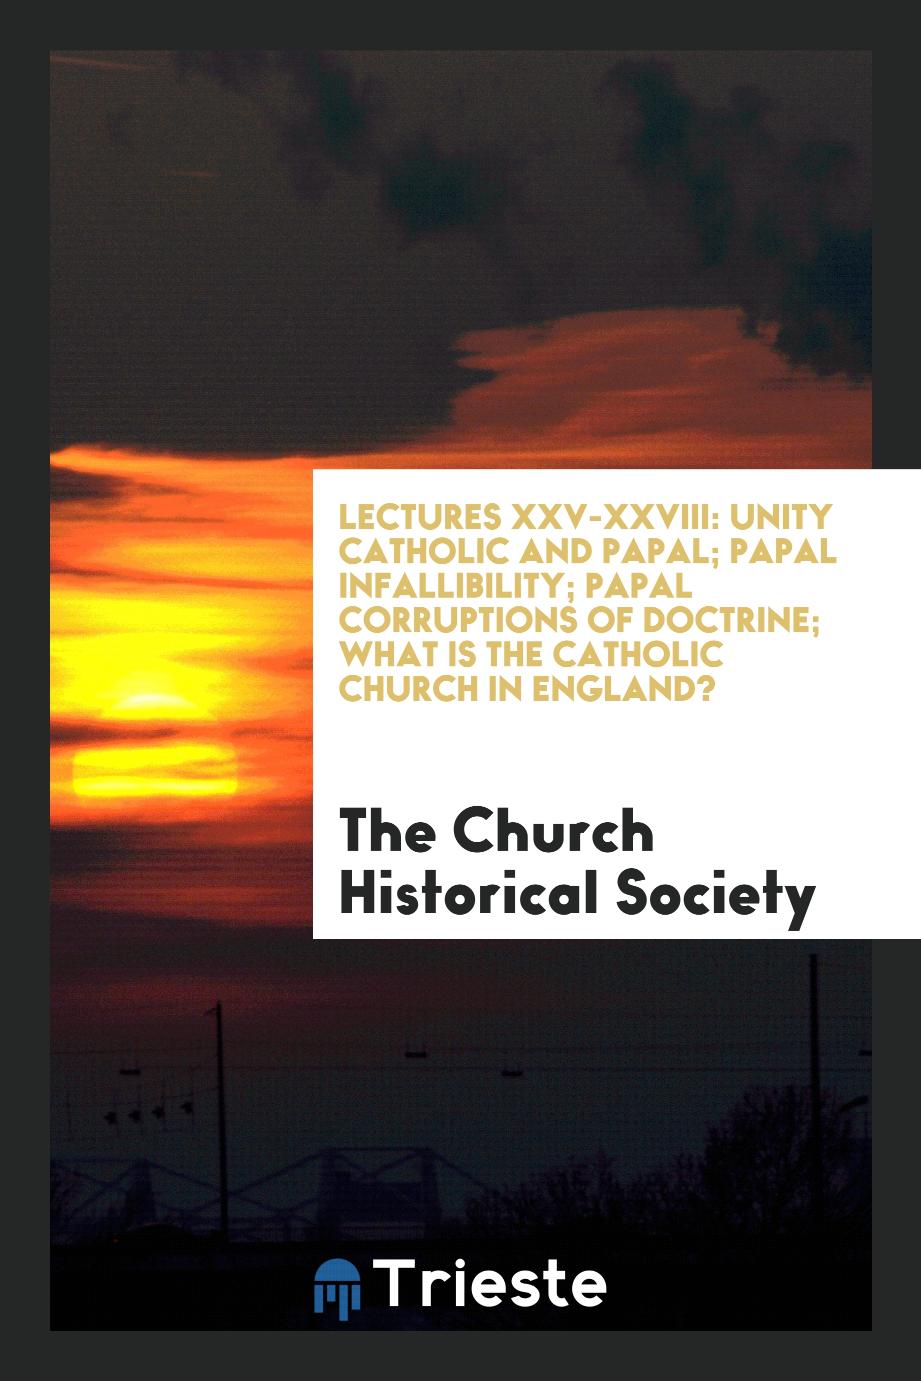 Lectures XXV-XXVIII: Unity Catholic and Papal; Papal Infallibility; Papal Corruptions of Doctrine; What Is the Catholic Church in England?